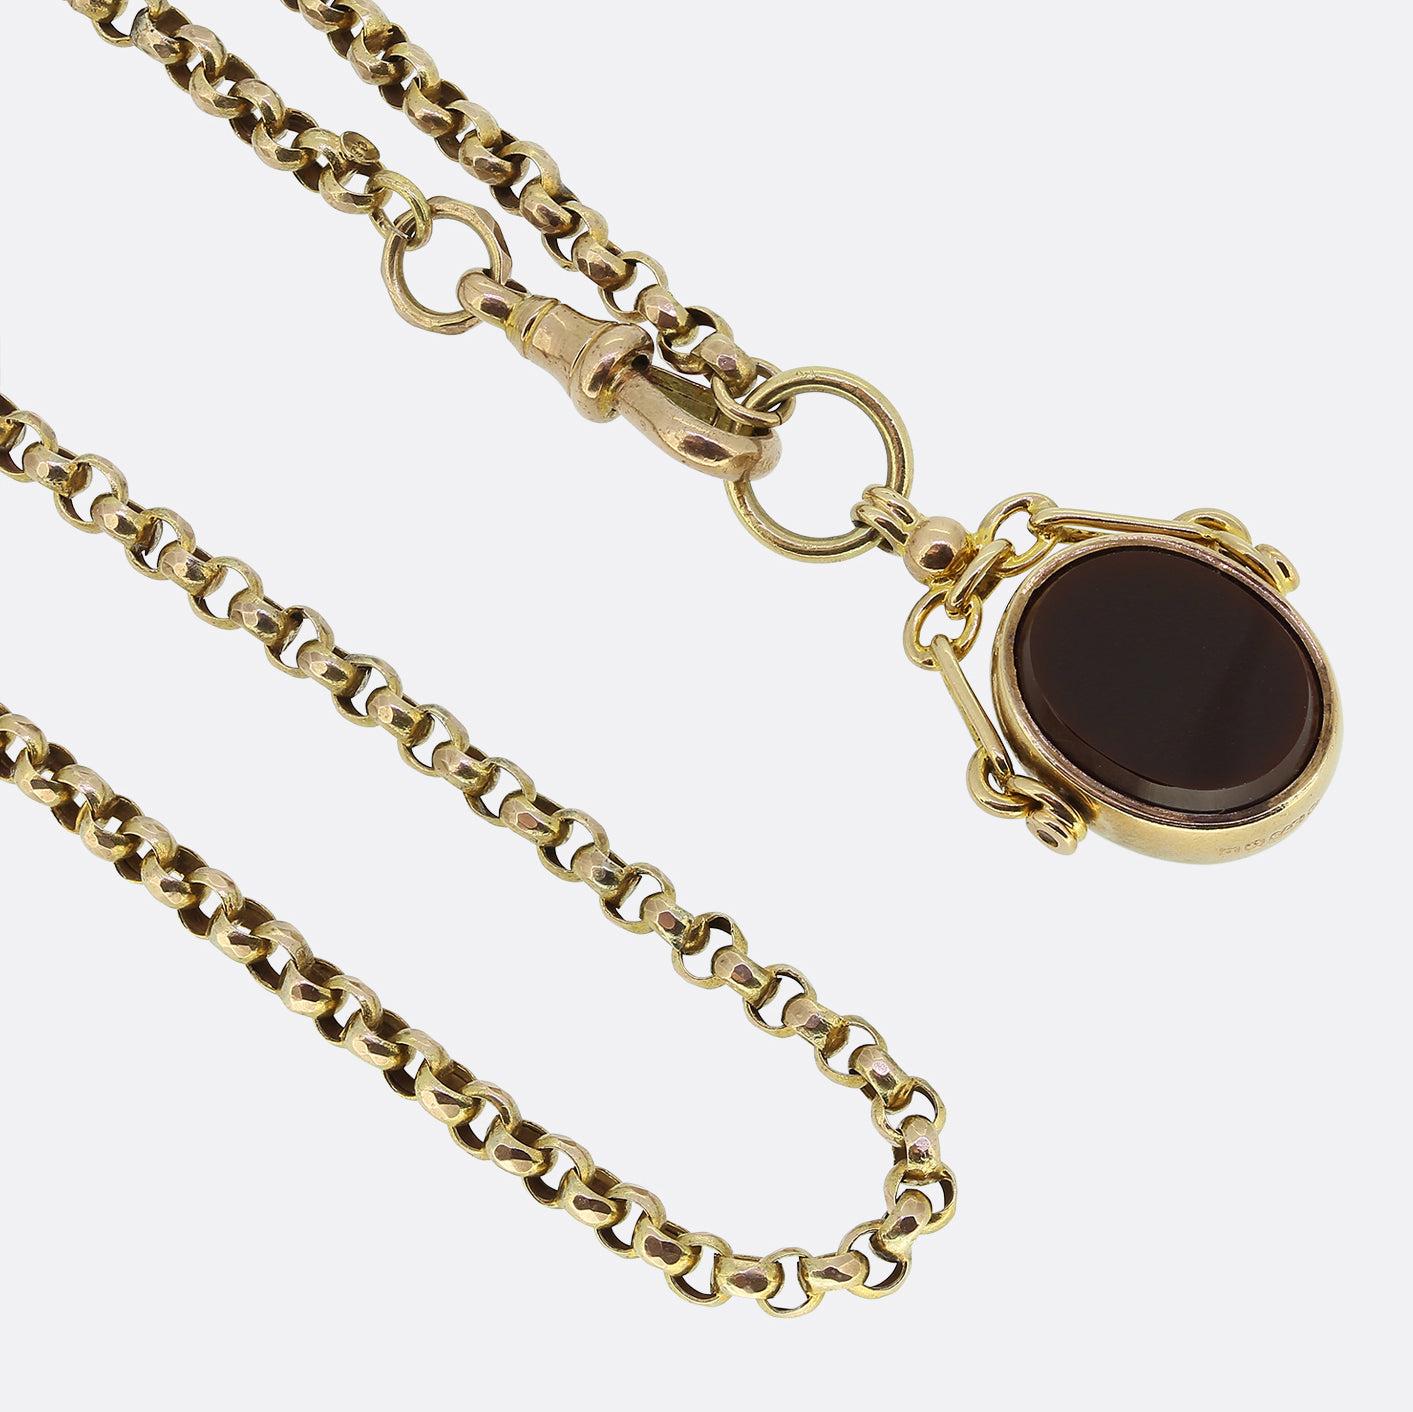 Here we have a chic and stylish necklace dating back to the early stages of the 20th century. The pendant has been crafted from 9ct yellow gold into the shape of a spinning fob which has been set on one side with an oval shaped rich red carnelian